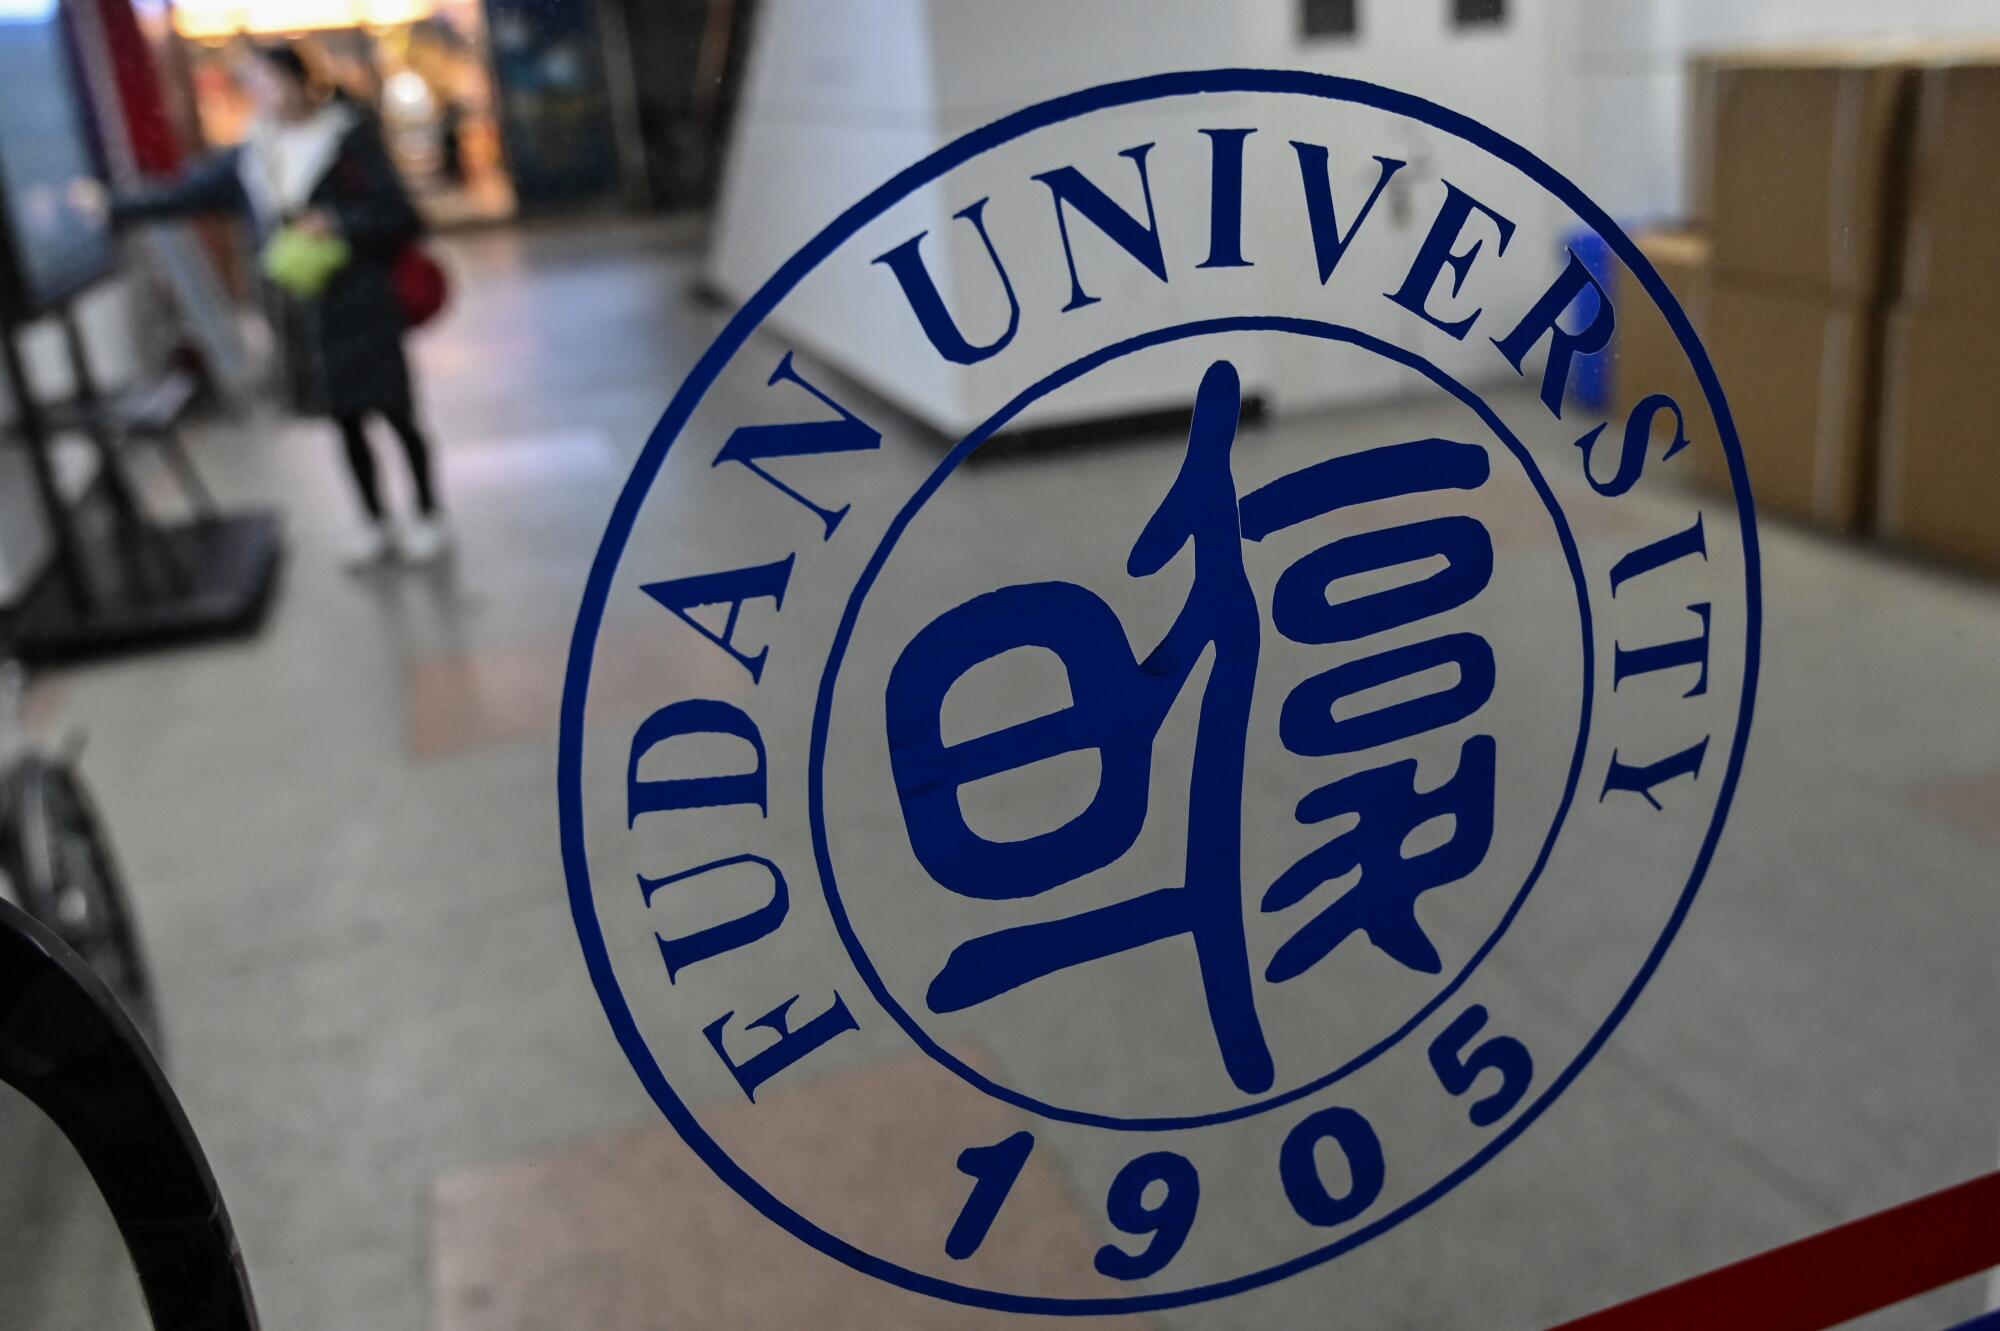 A Fudan University logo is seen on a glass door on the campus in Shanghai.